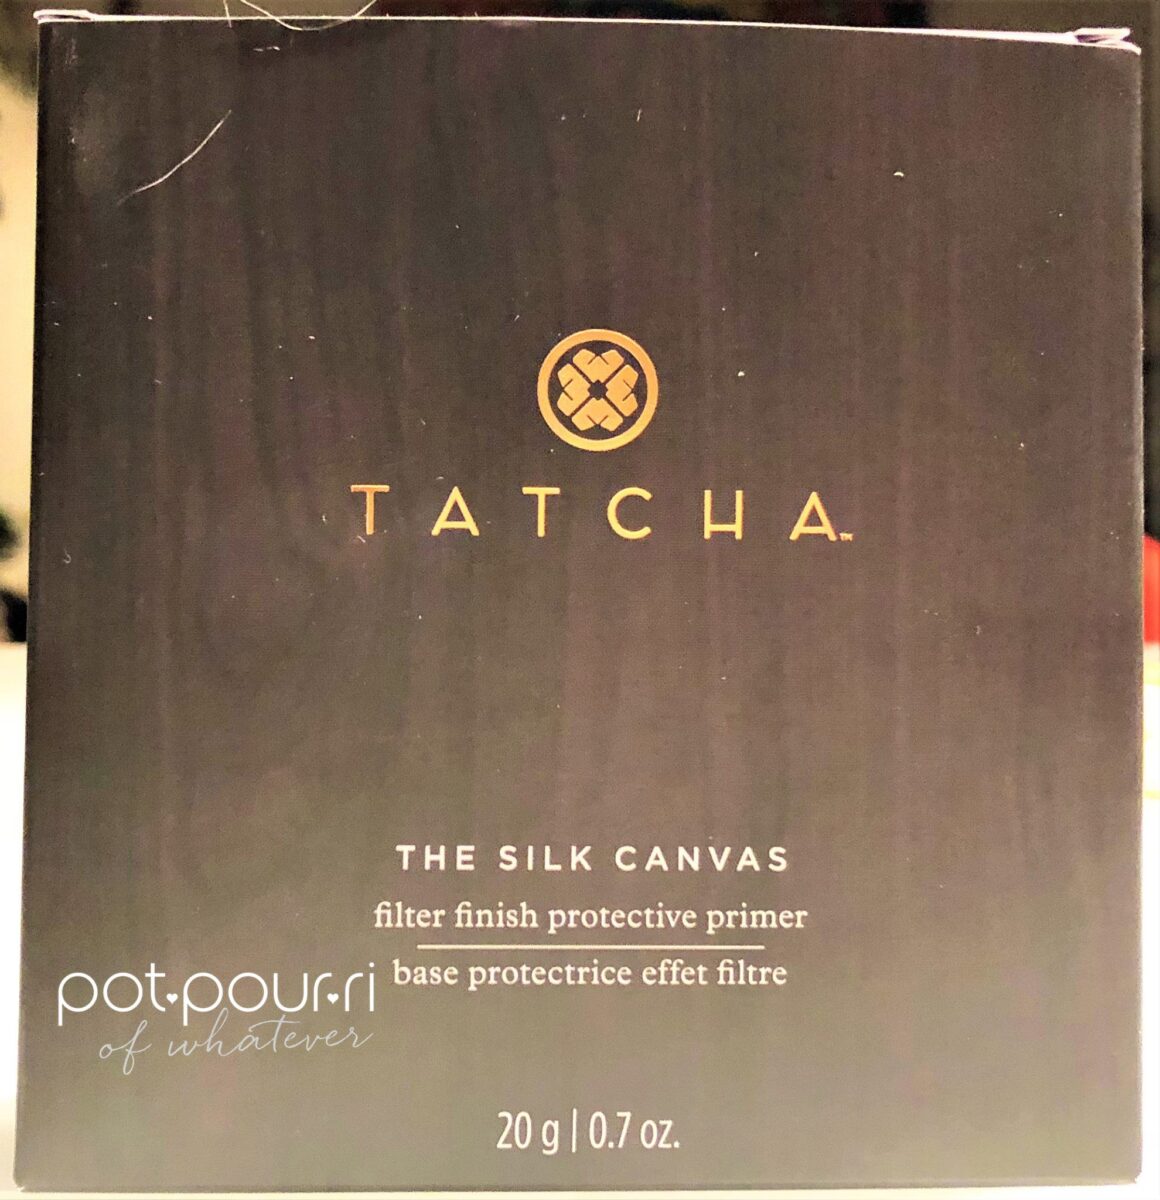 Tatcha Silk Canvas Protective Primer and Filter Packaging Box